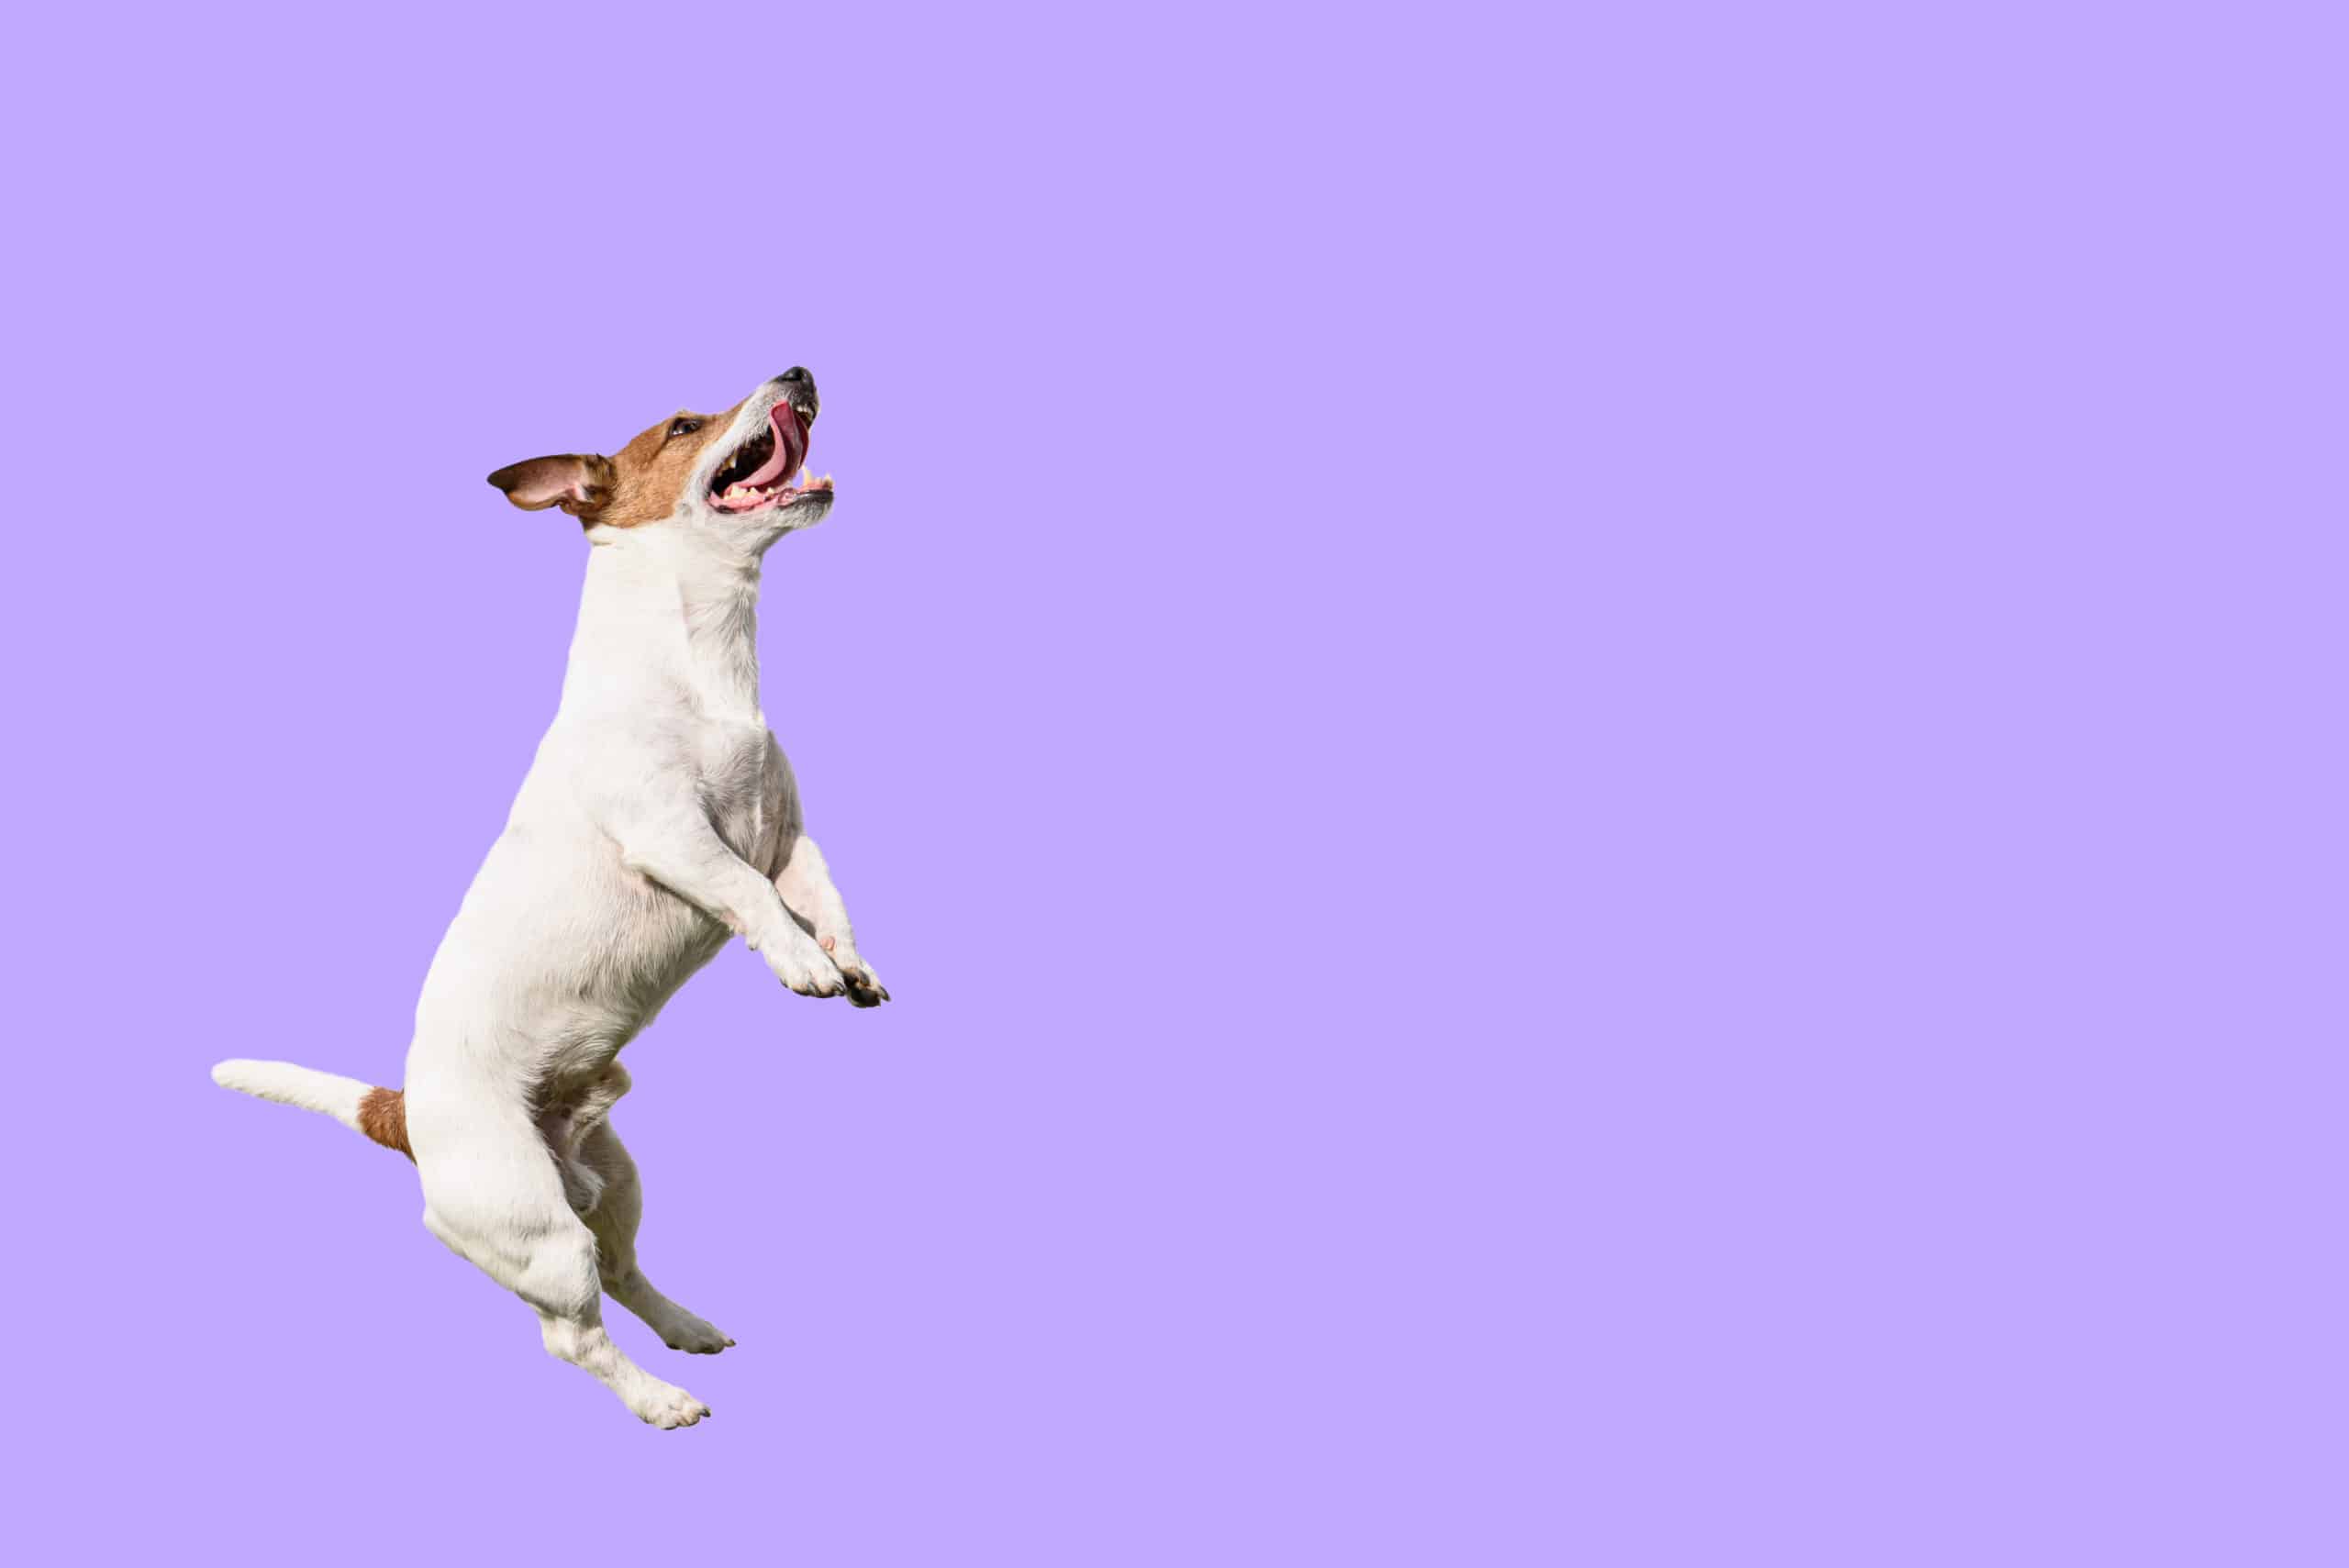 Why does my dog yelp when he jumps?